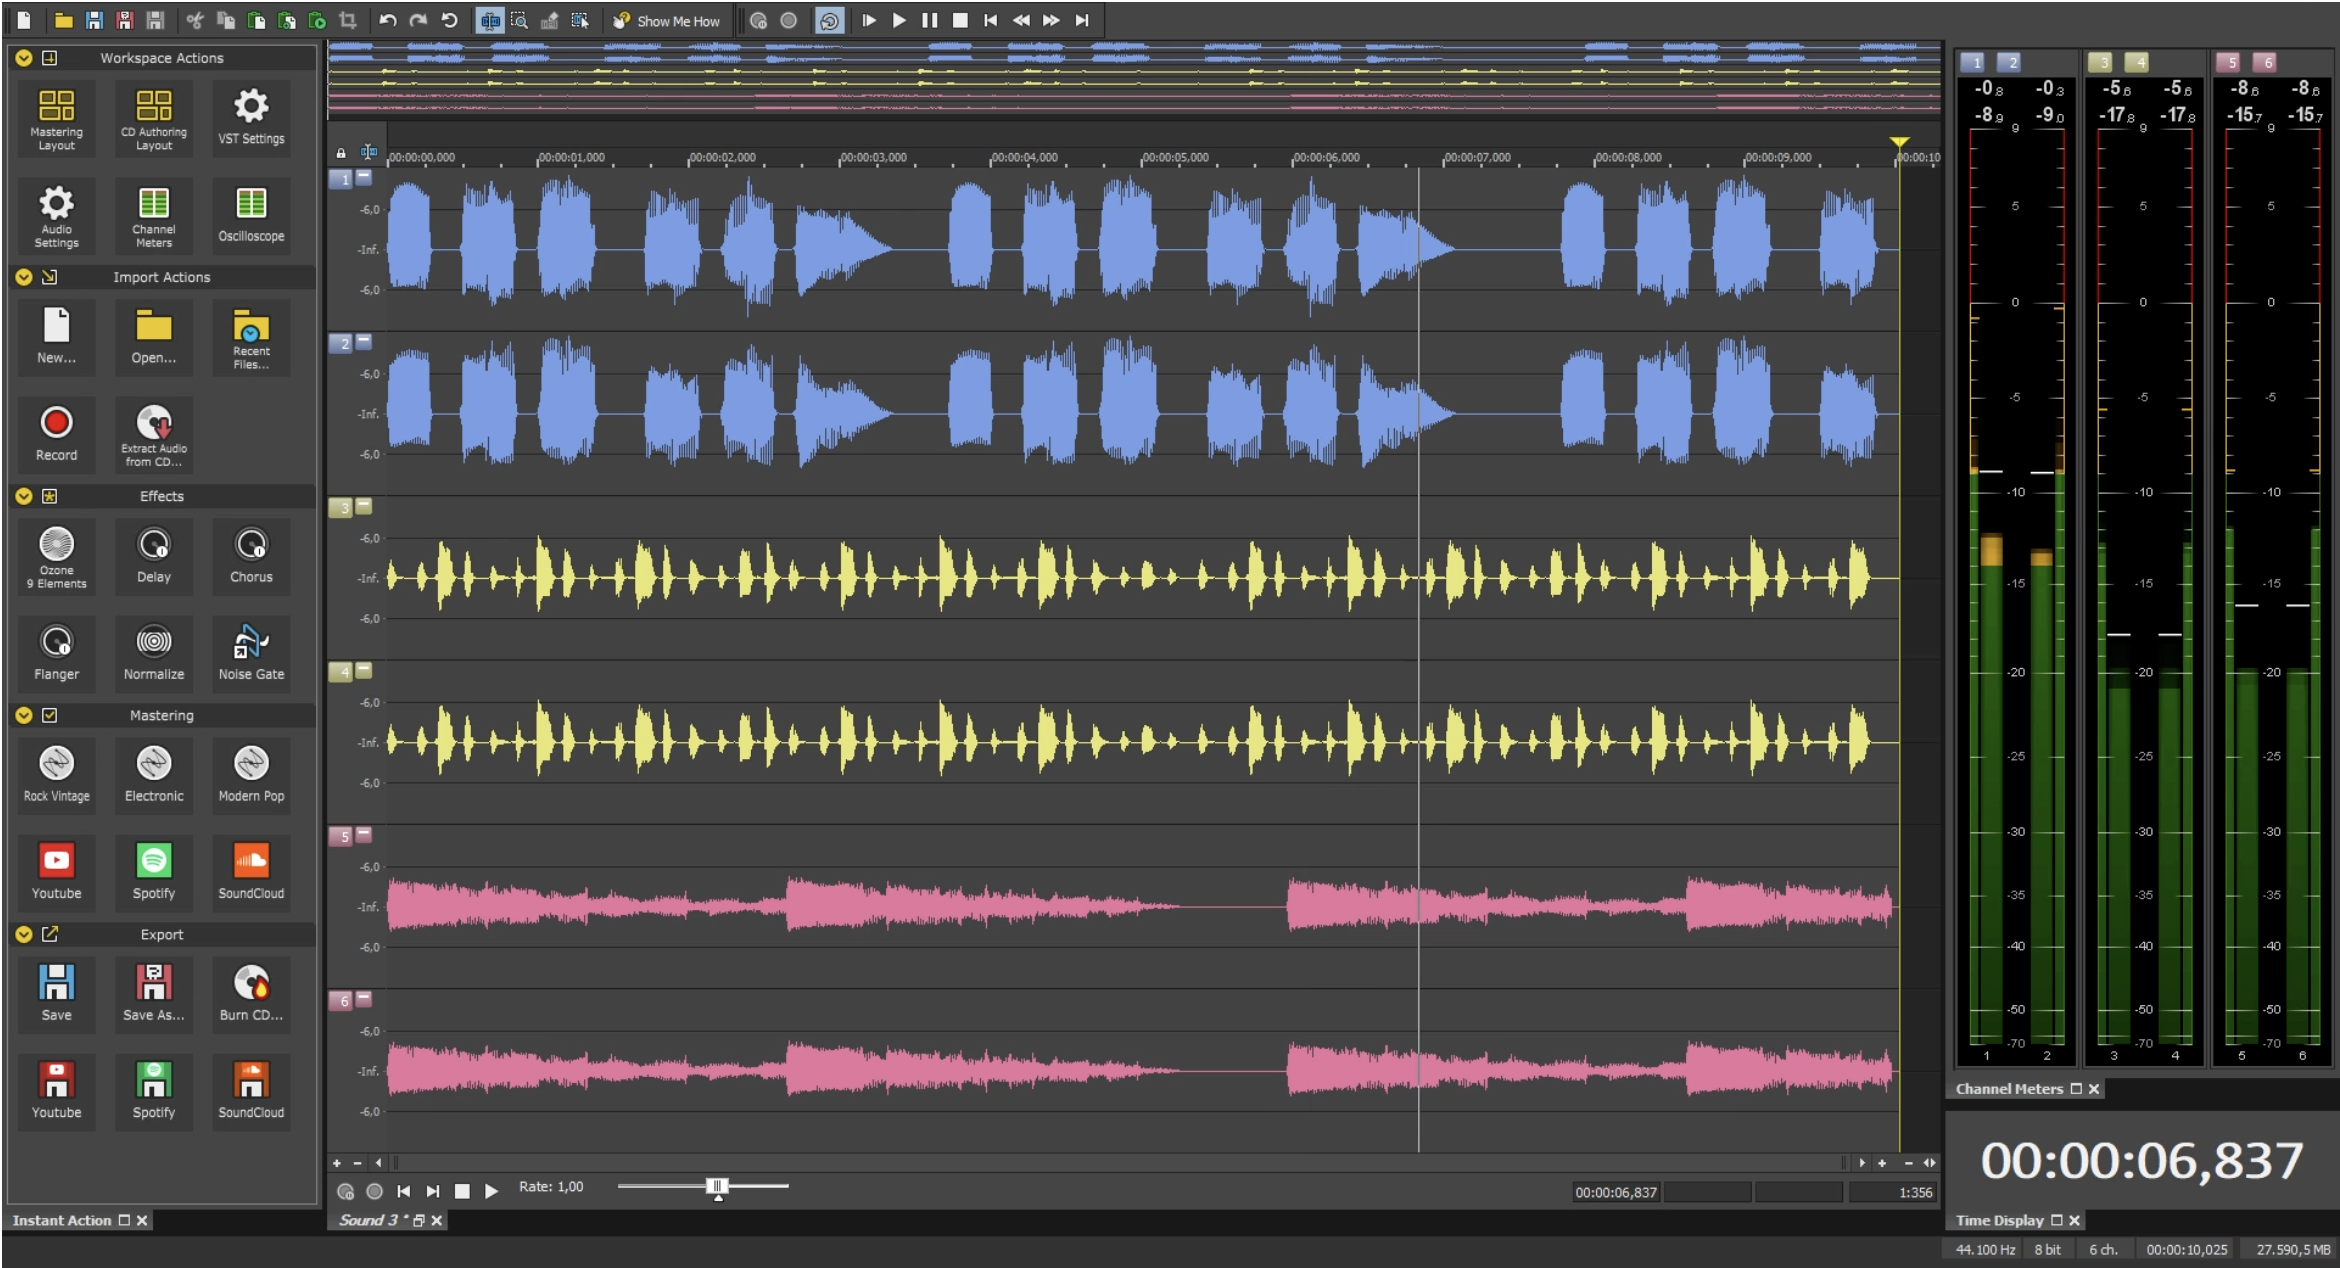 sound forge 8.0 free download mac